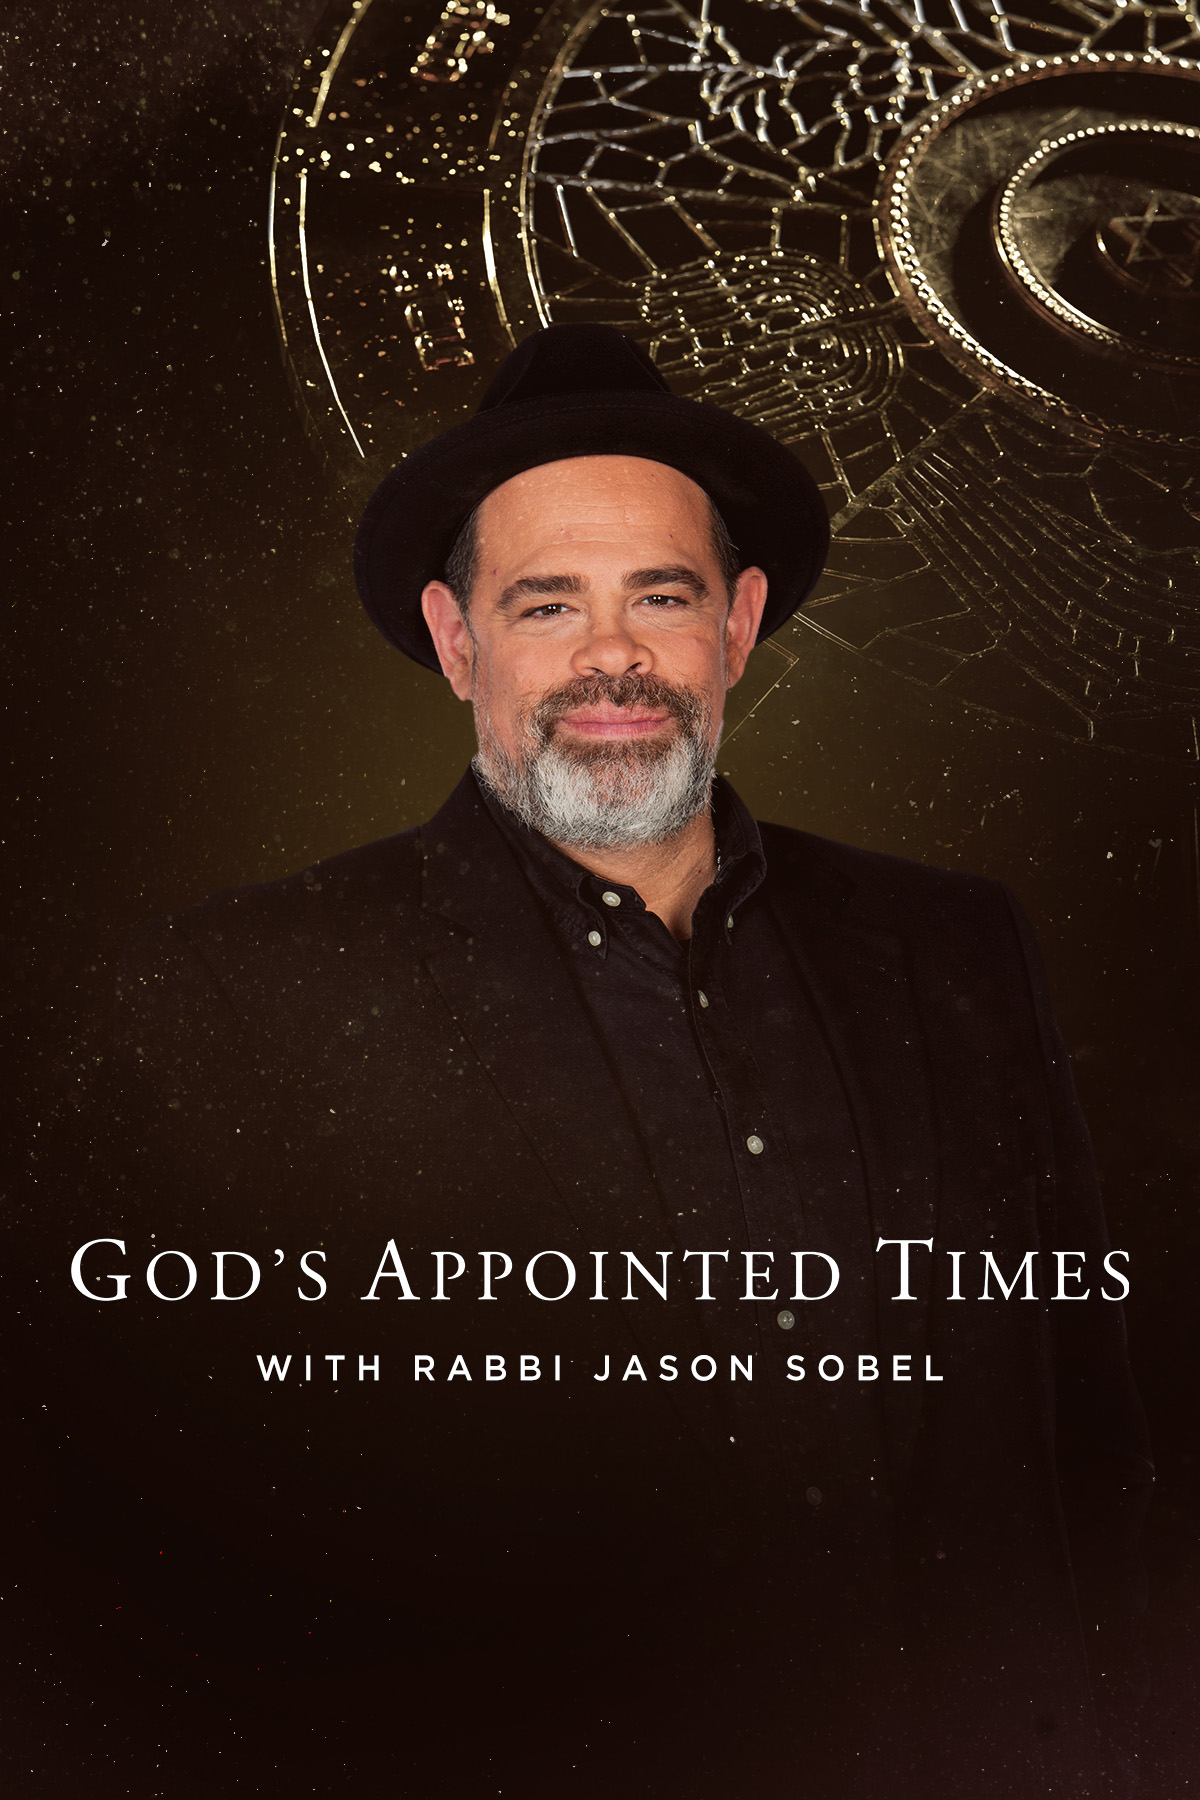 God's Appointed Times with Rabbi Jason Sobel